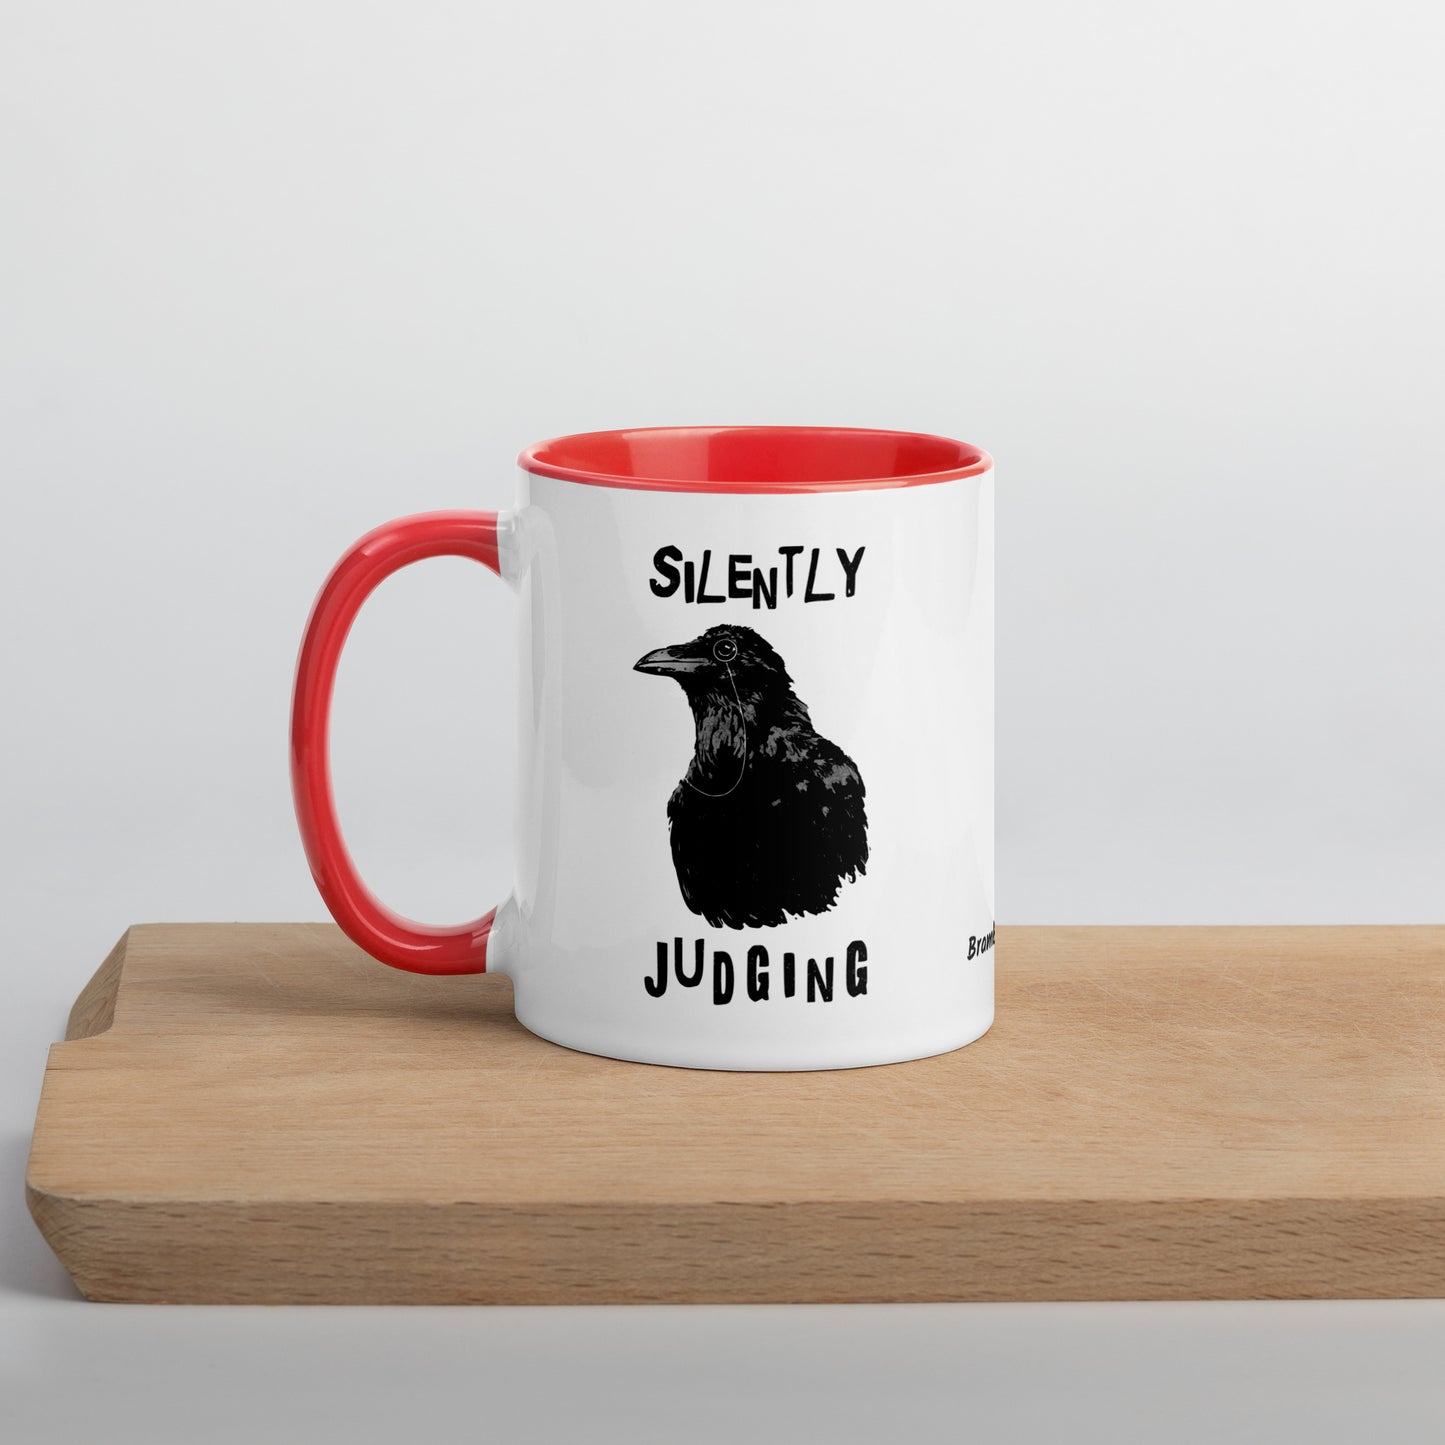 11 ounce ceramic mug with Silently Judging text surrounding a monacle-wearing crow. Double-sided design. Mug has red rim, handle, and inside. Shown sitting on wooden cutting board.